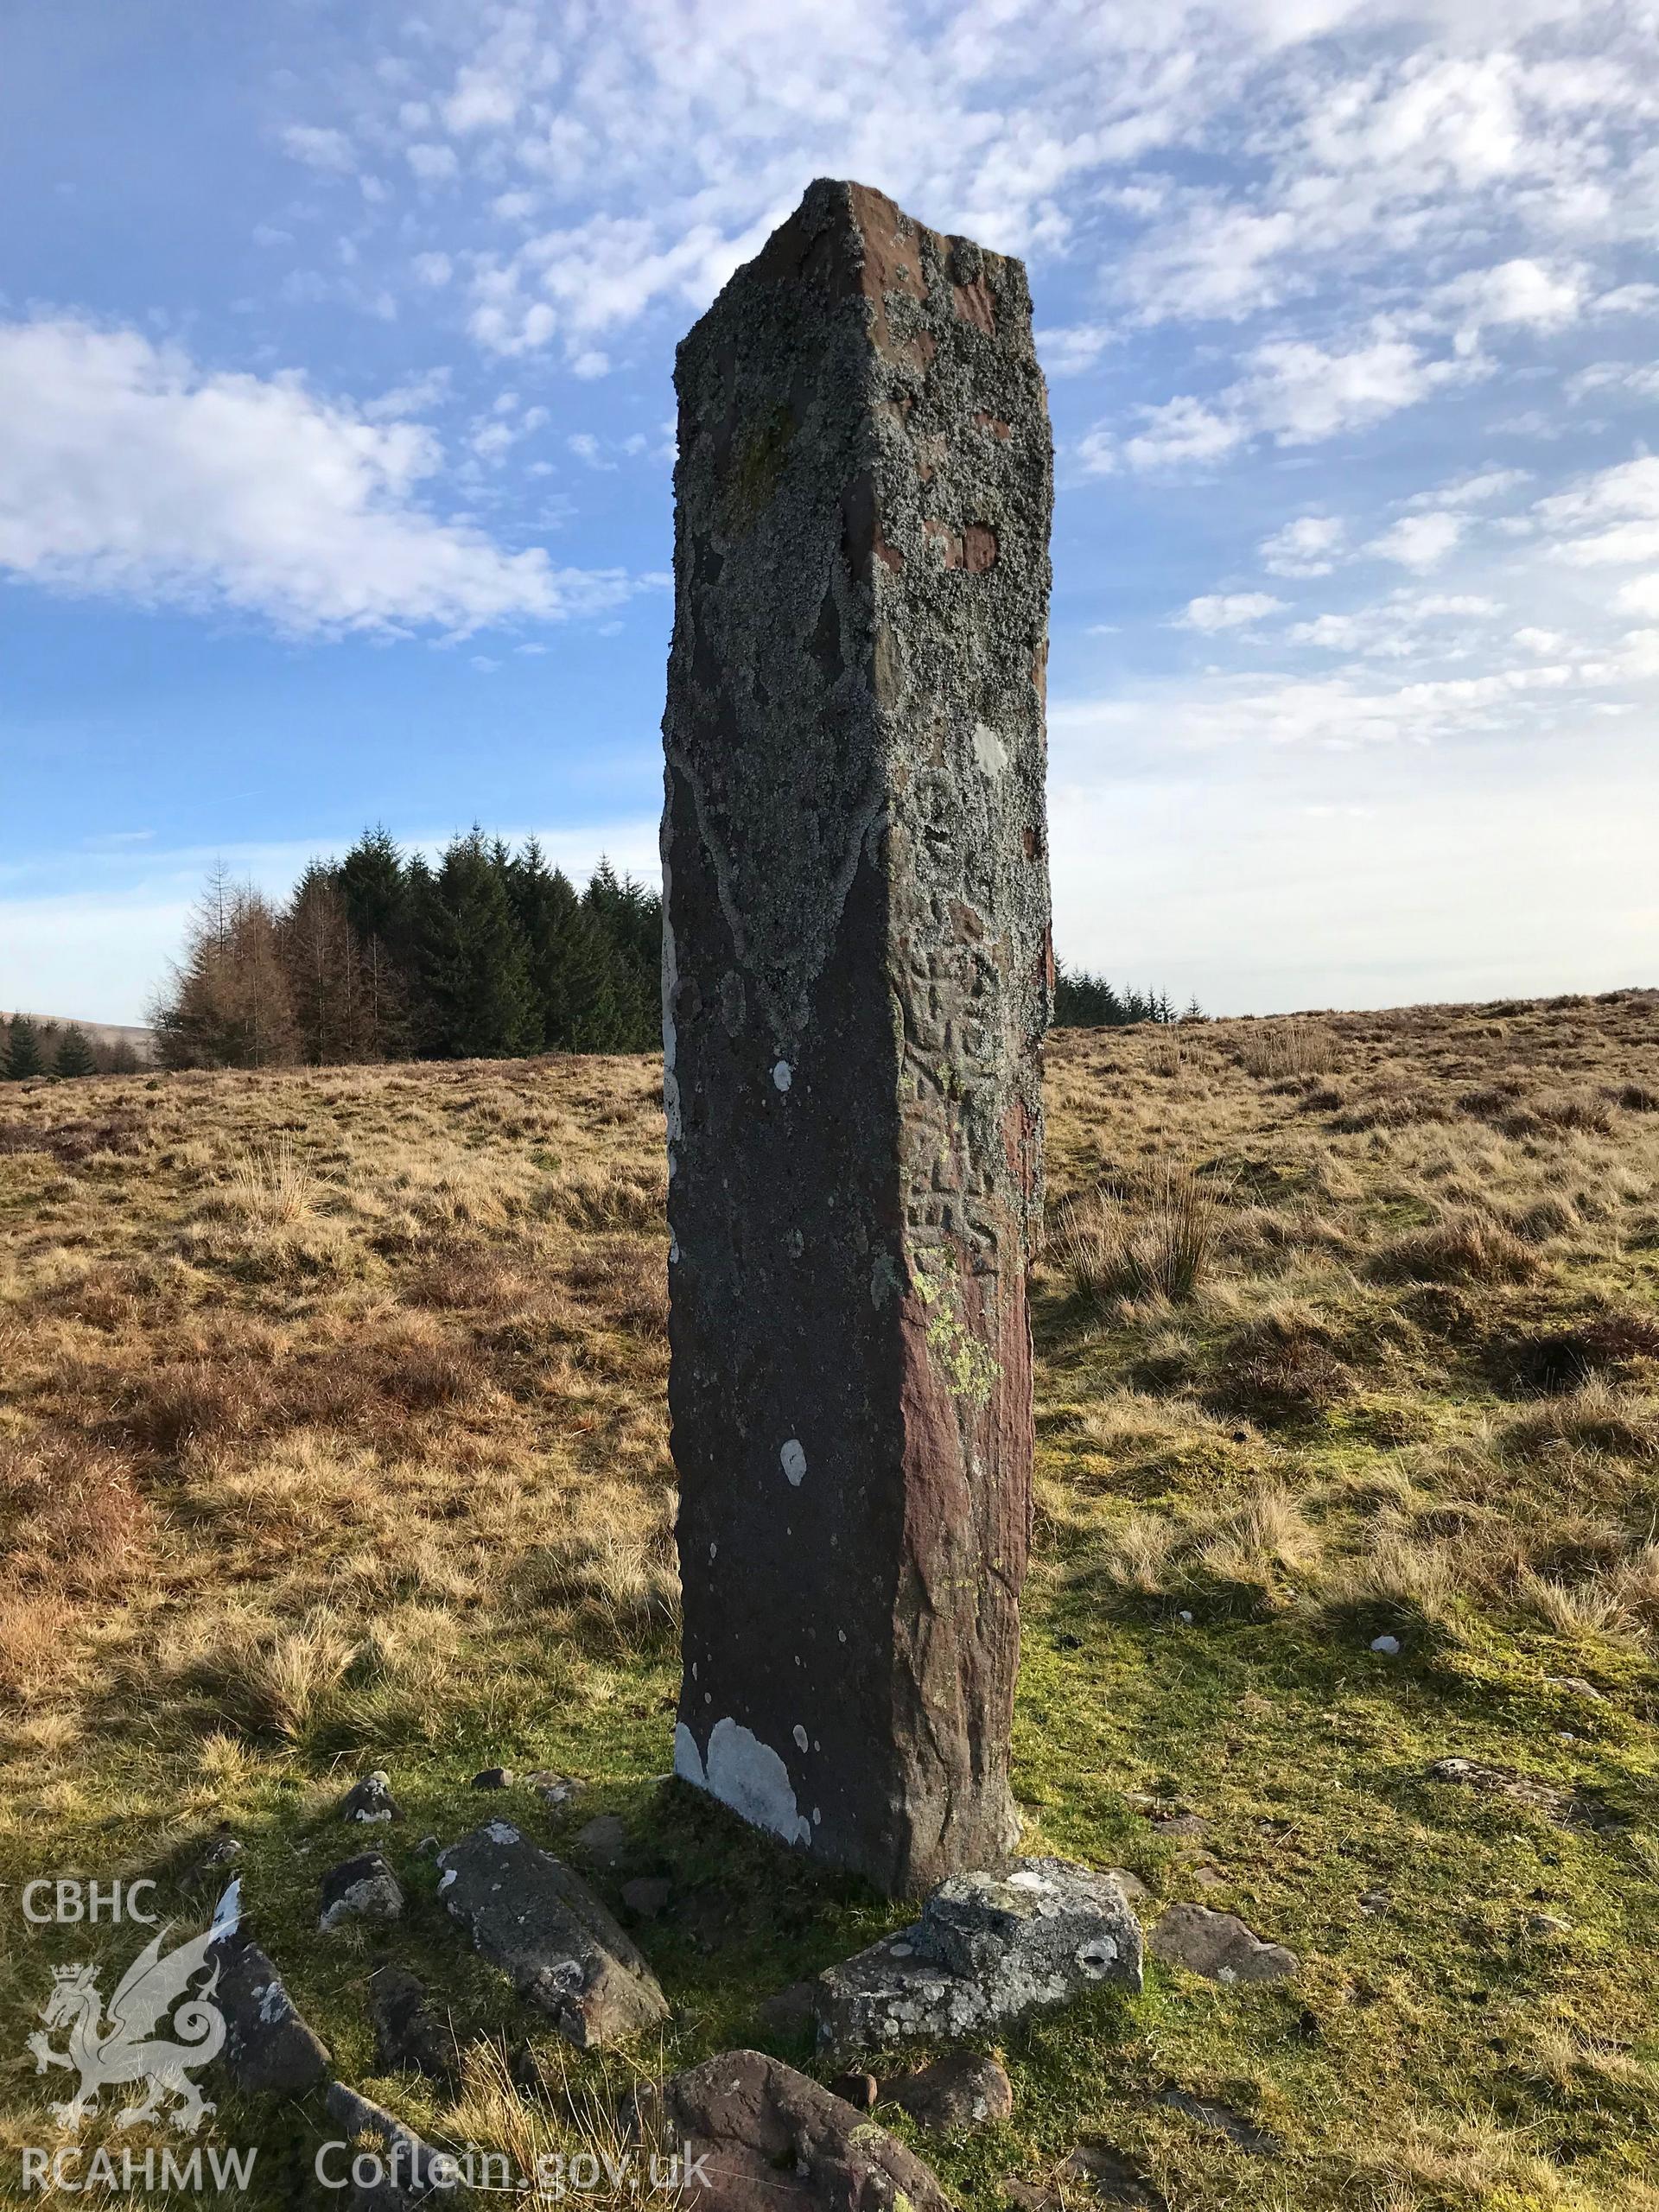 Colour photograph of Maen Madoc inscribed stone and roman road, in the Brecon Beacons north west of Merthyr Tydfil, taken by Paul R. Davis on 22nd February 2019.